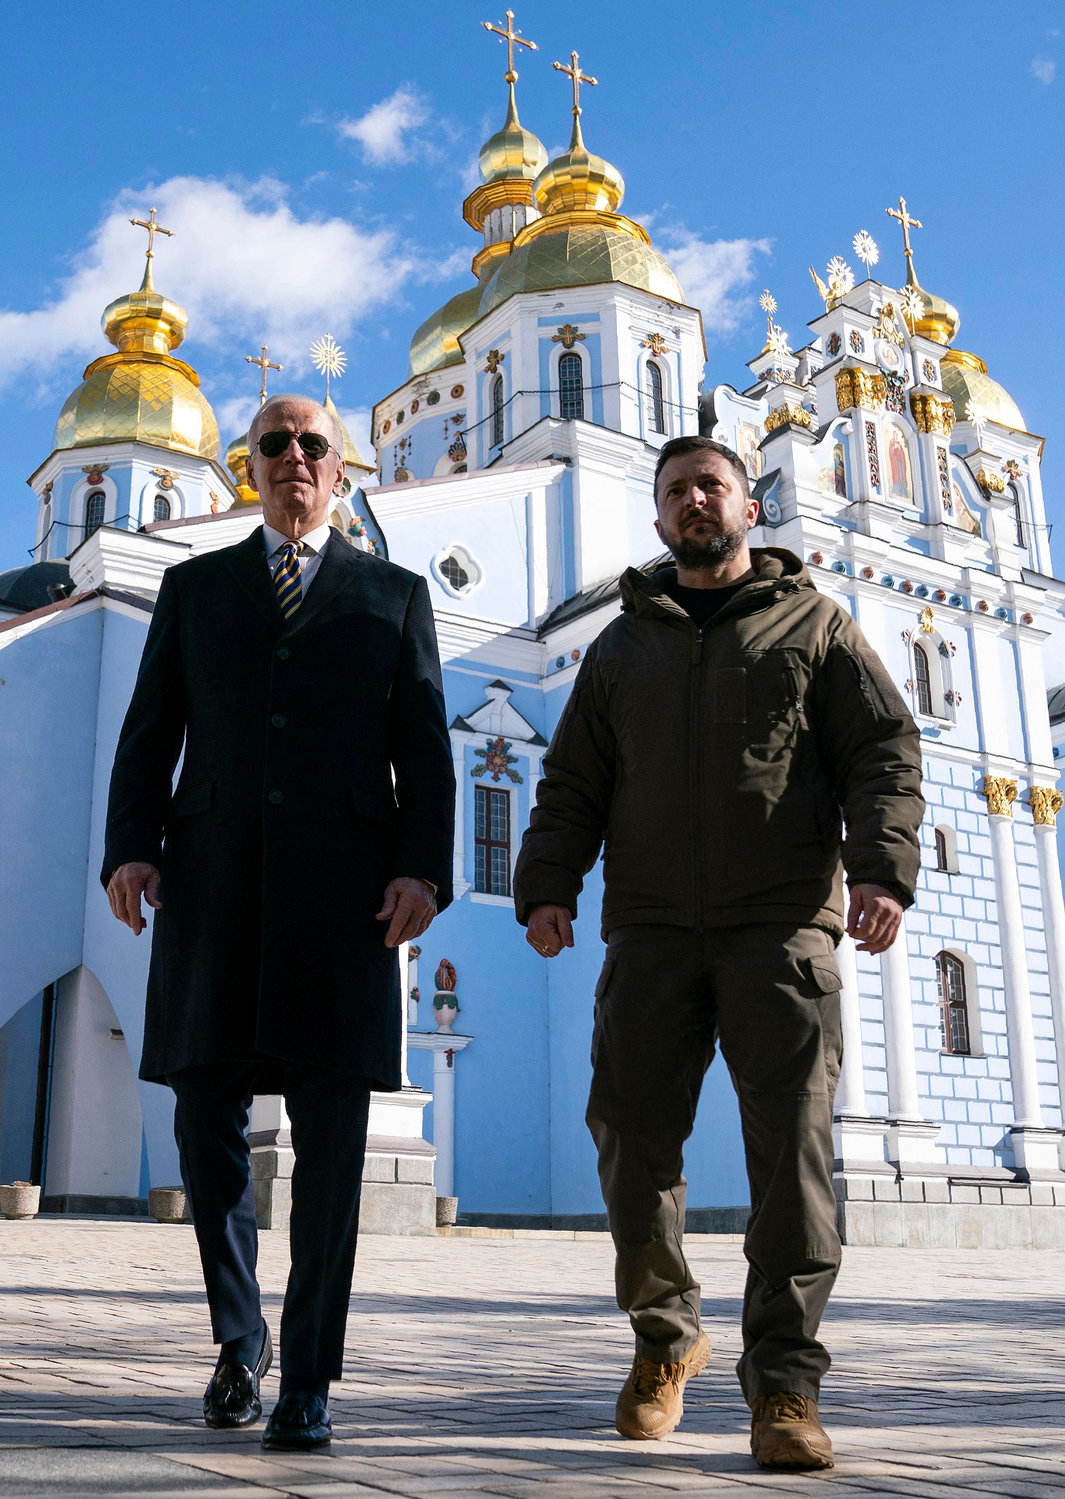 U.S. President Joe Biden, left, walks with Ukrainian President Volodymyr Zelenskyy in front of St. Michael's Golden-Domed Cathedral during an unannounced visit, in Kyiv, on Monday, Feb. 20, 2023. (Evan Vucci/Pool/AFP/Getty Images/TNS)